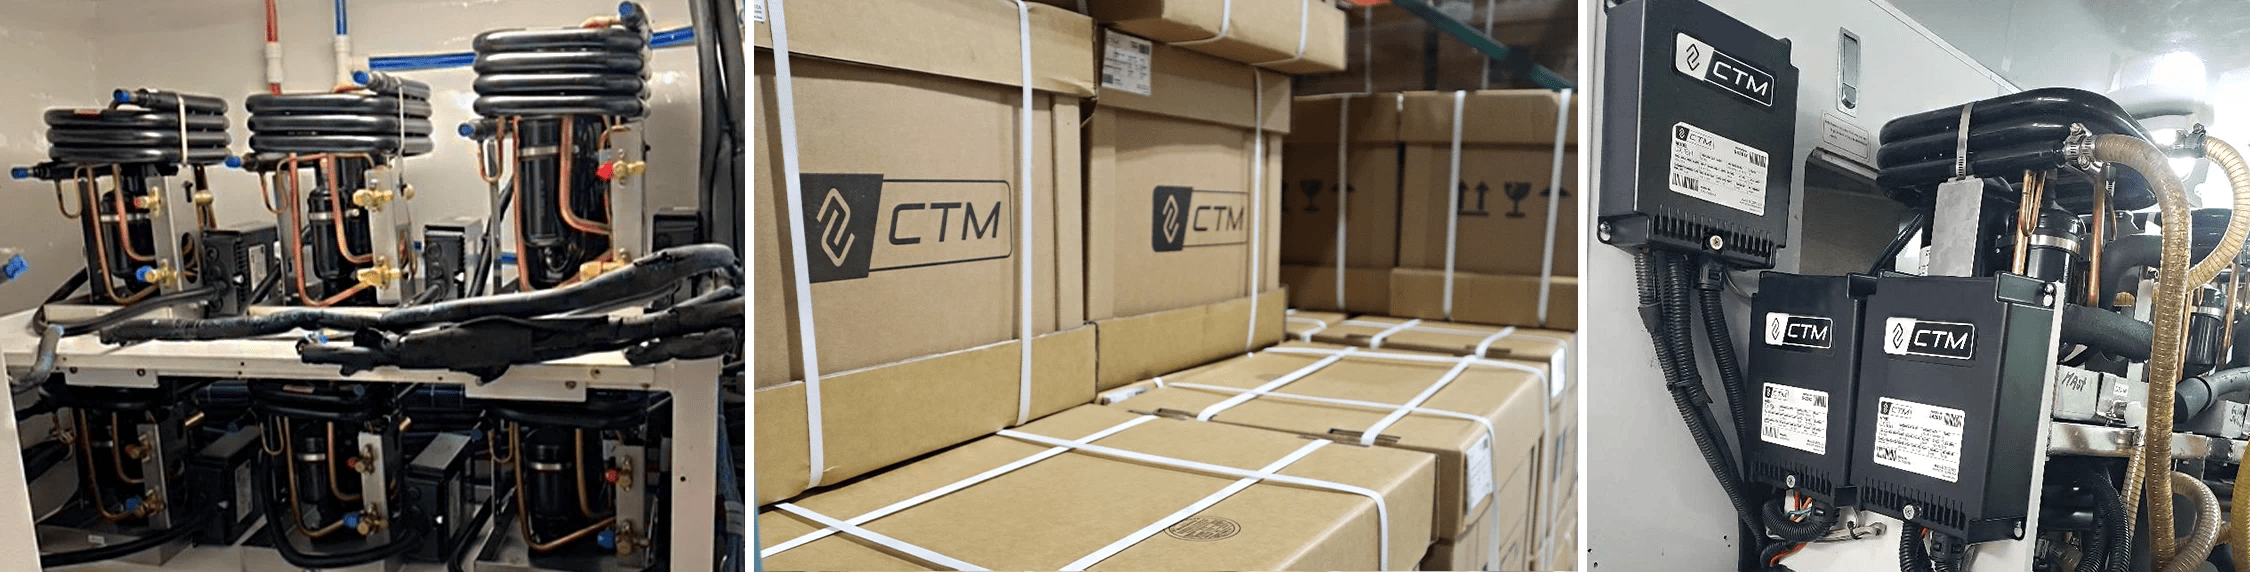 CTM Split Marine Air Conditioning Systems